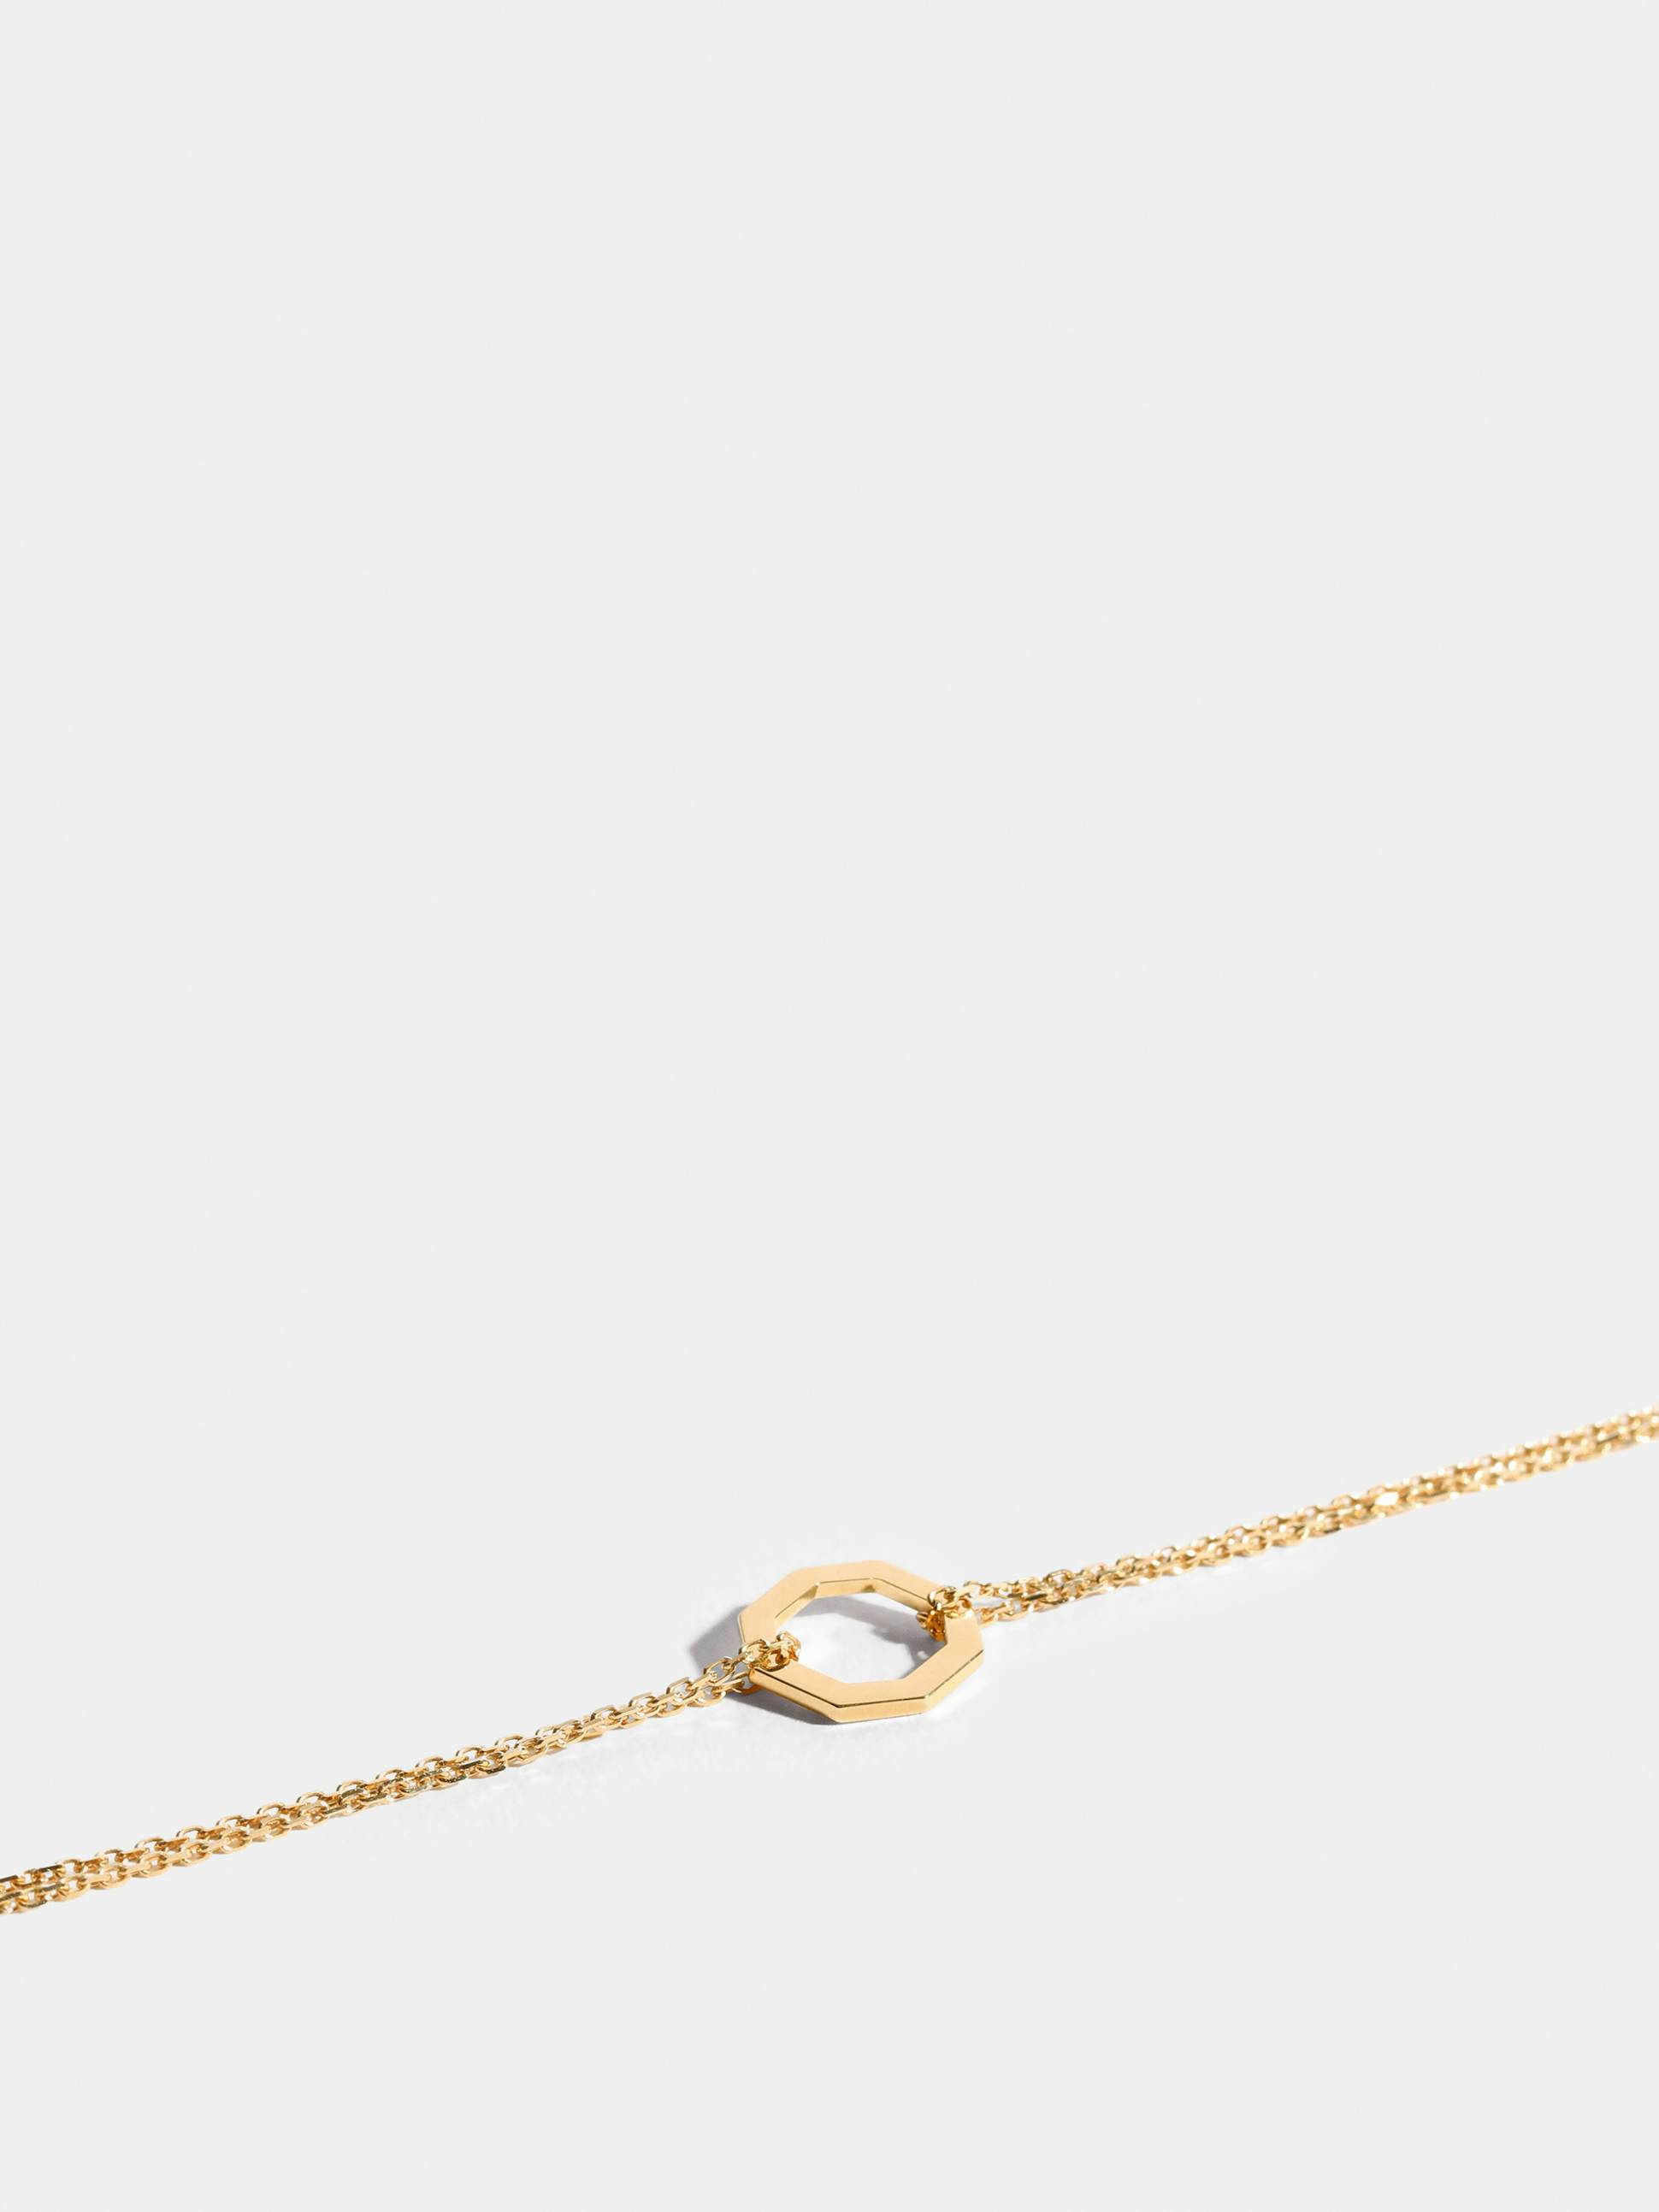 Octogone motif in 18k Fairmined ethical yellow gold, on a chain.